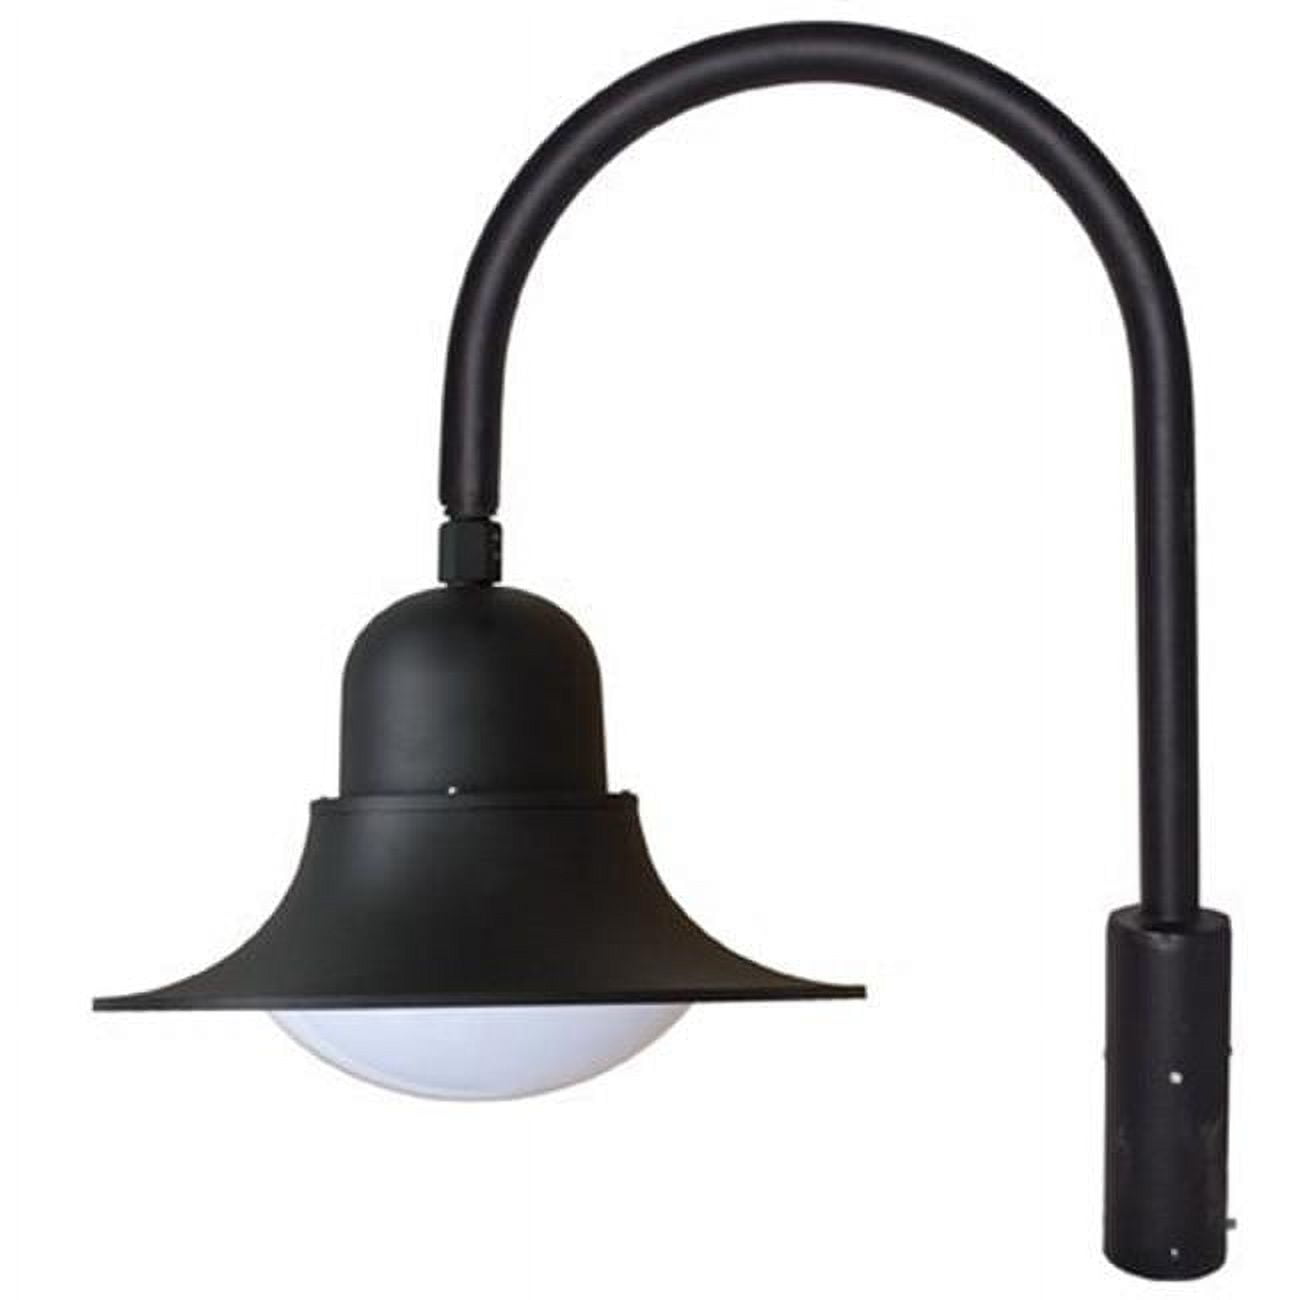 Picture of Dabmar Lighting GM613-B-MT 50W Powder Coated Cast Aluminum Post Top Light Fixture with High Pressure Sodium Lamp, Black - 35.50 x 22 x 30.92 in.